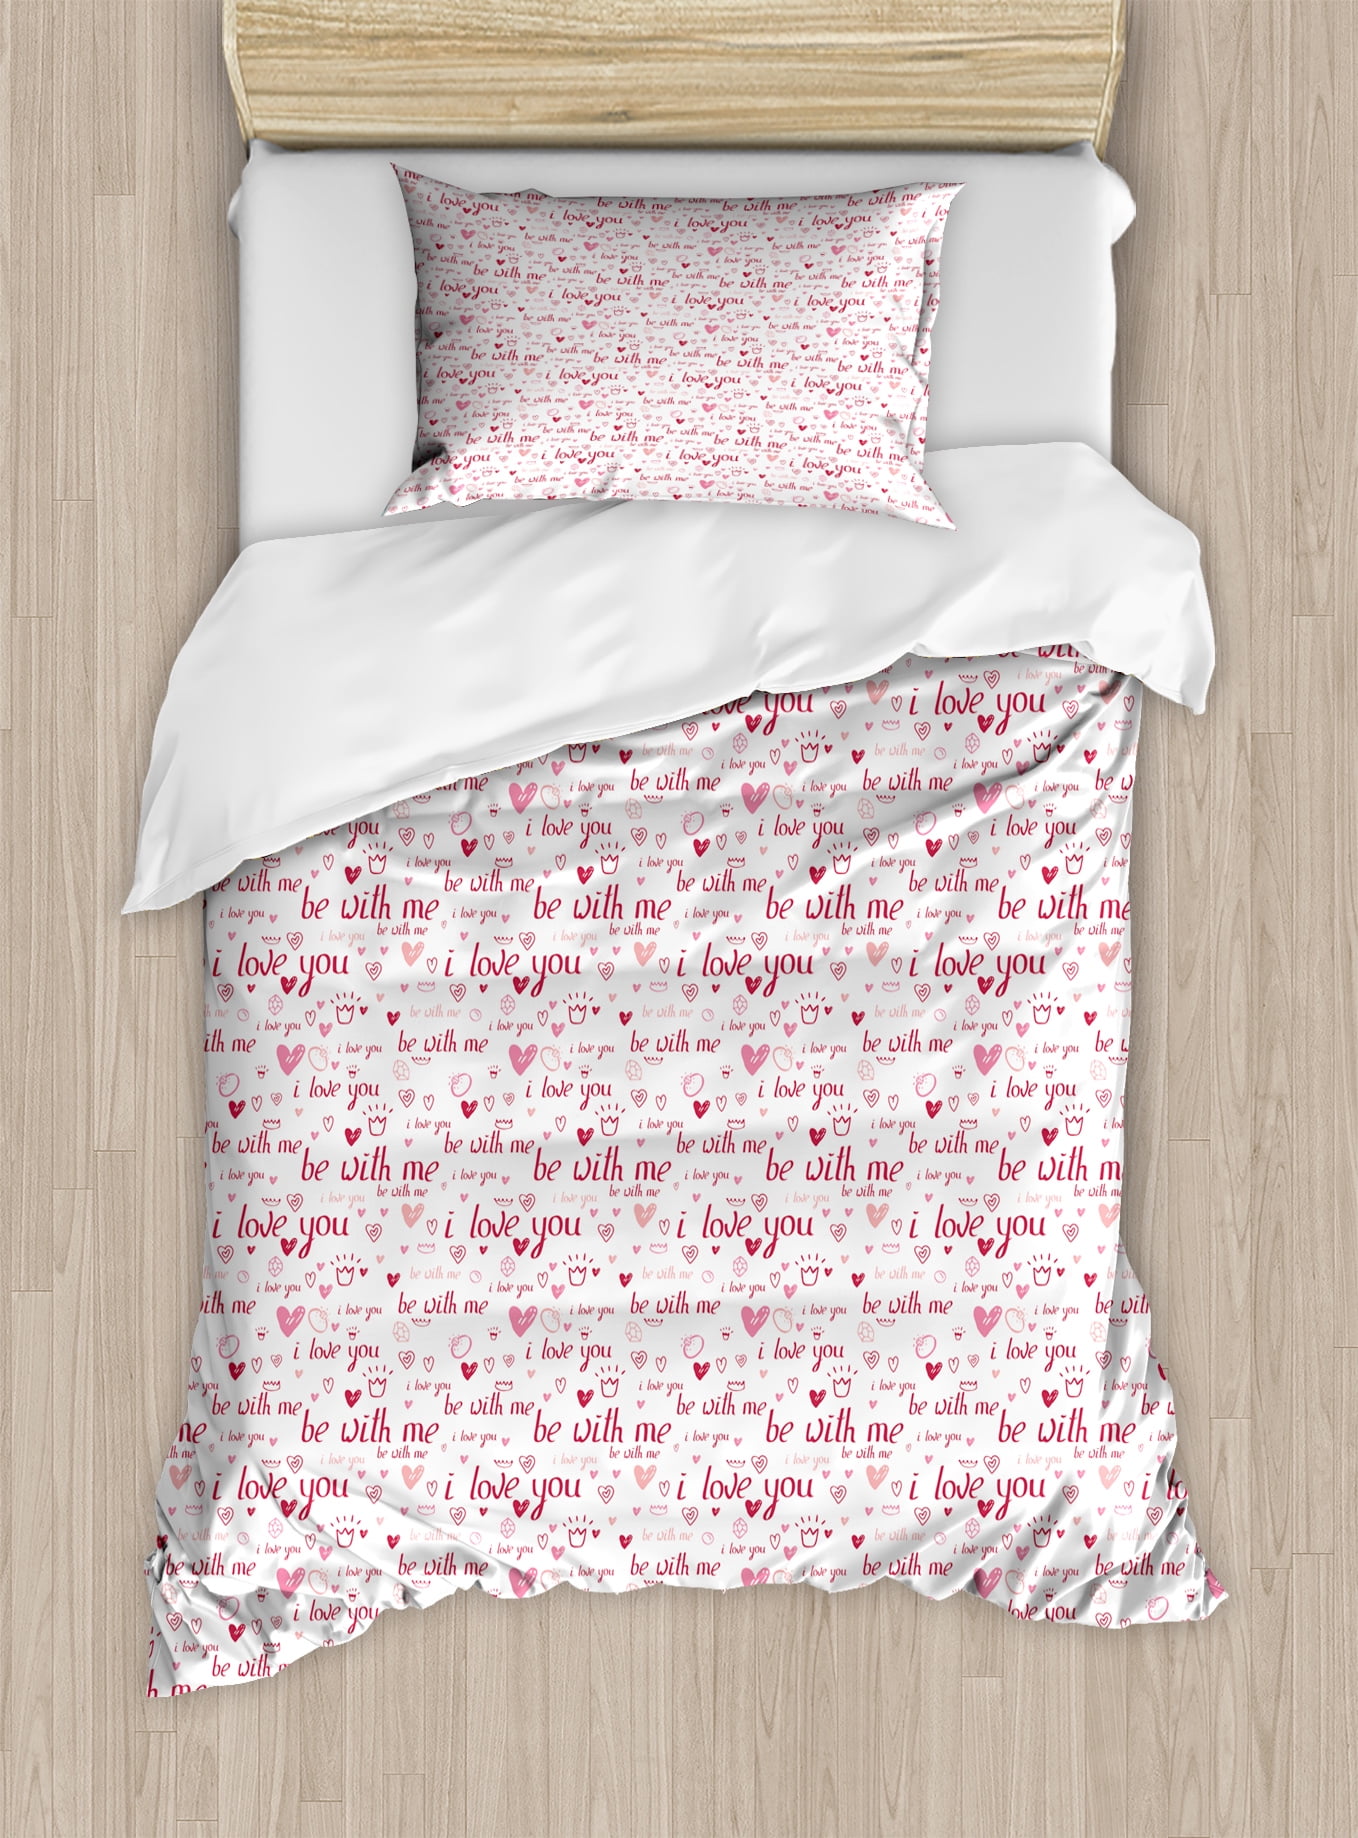 I Love You Duvet Cover Set Hand Drawn Style Hearts Gems And